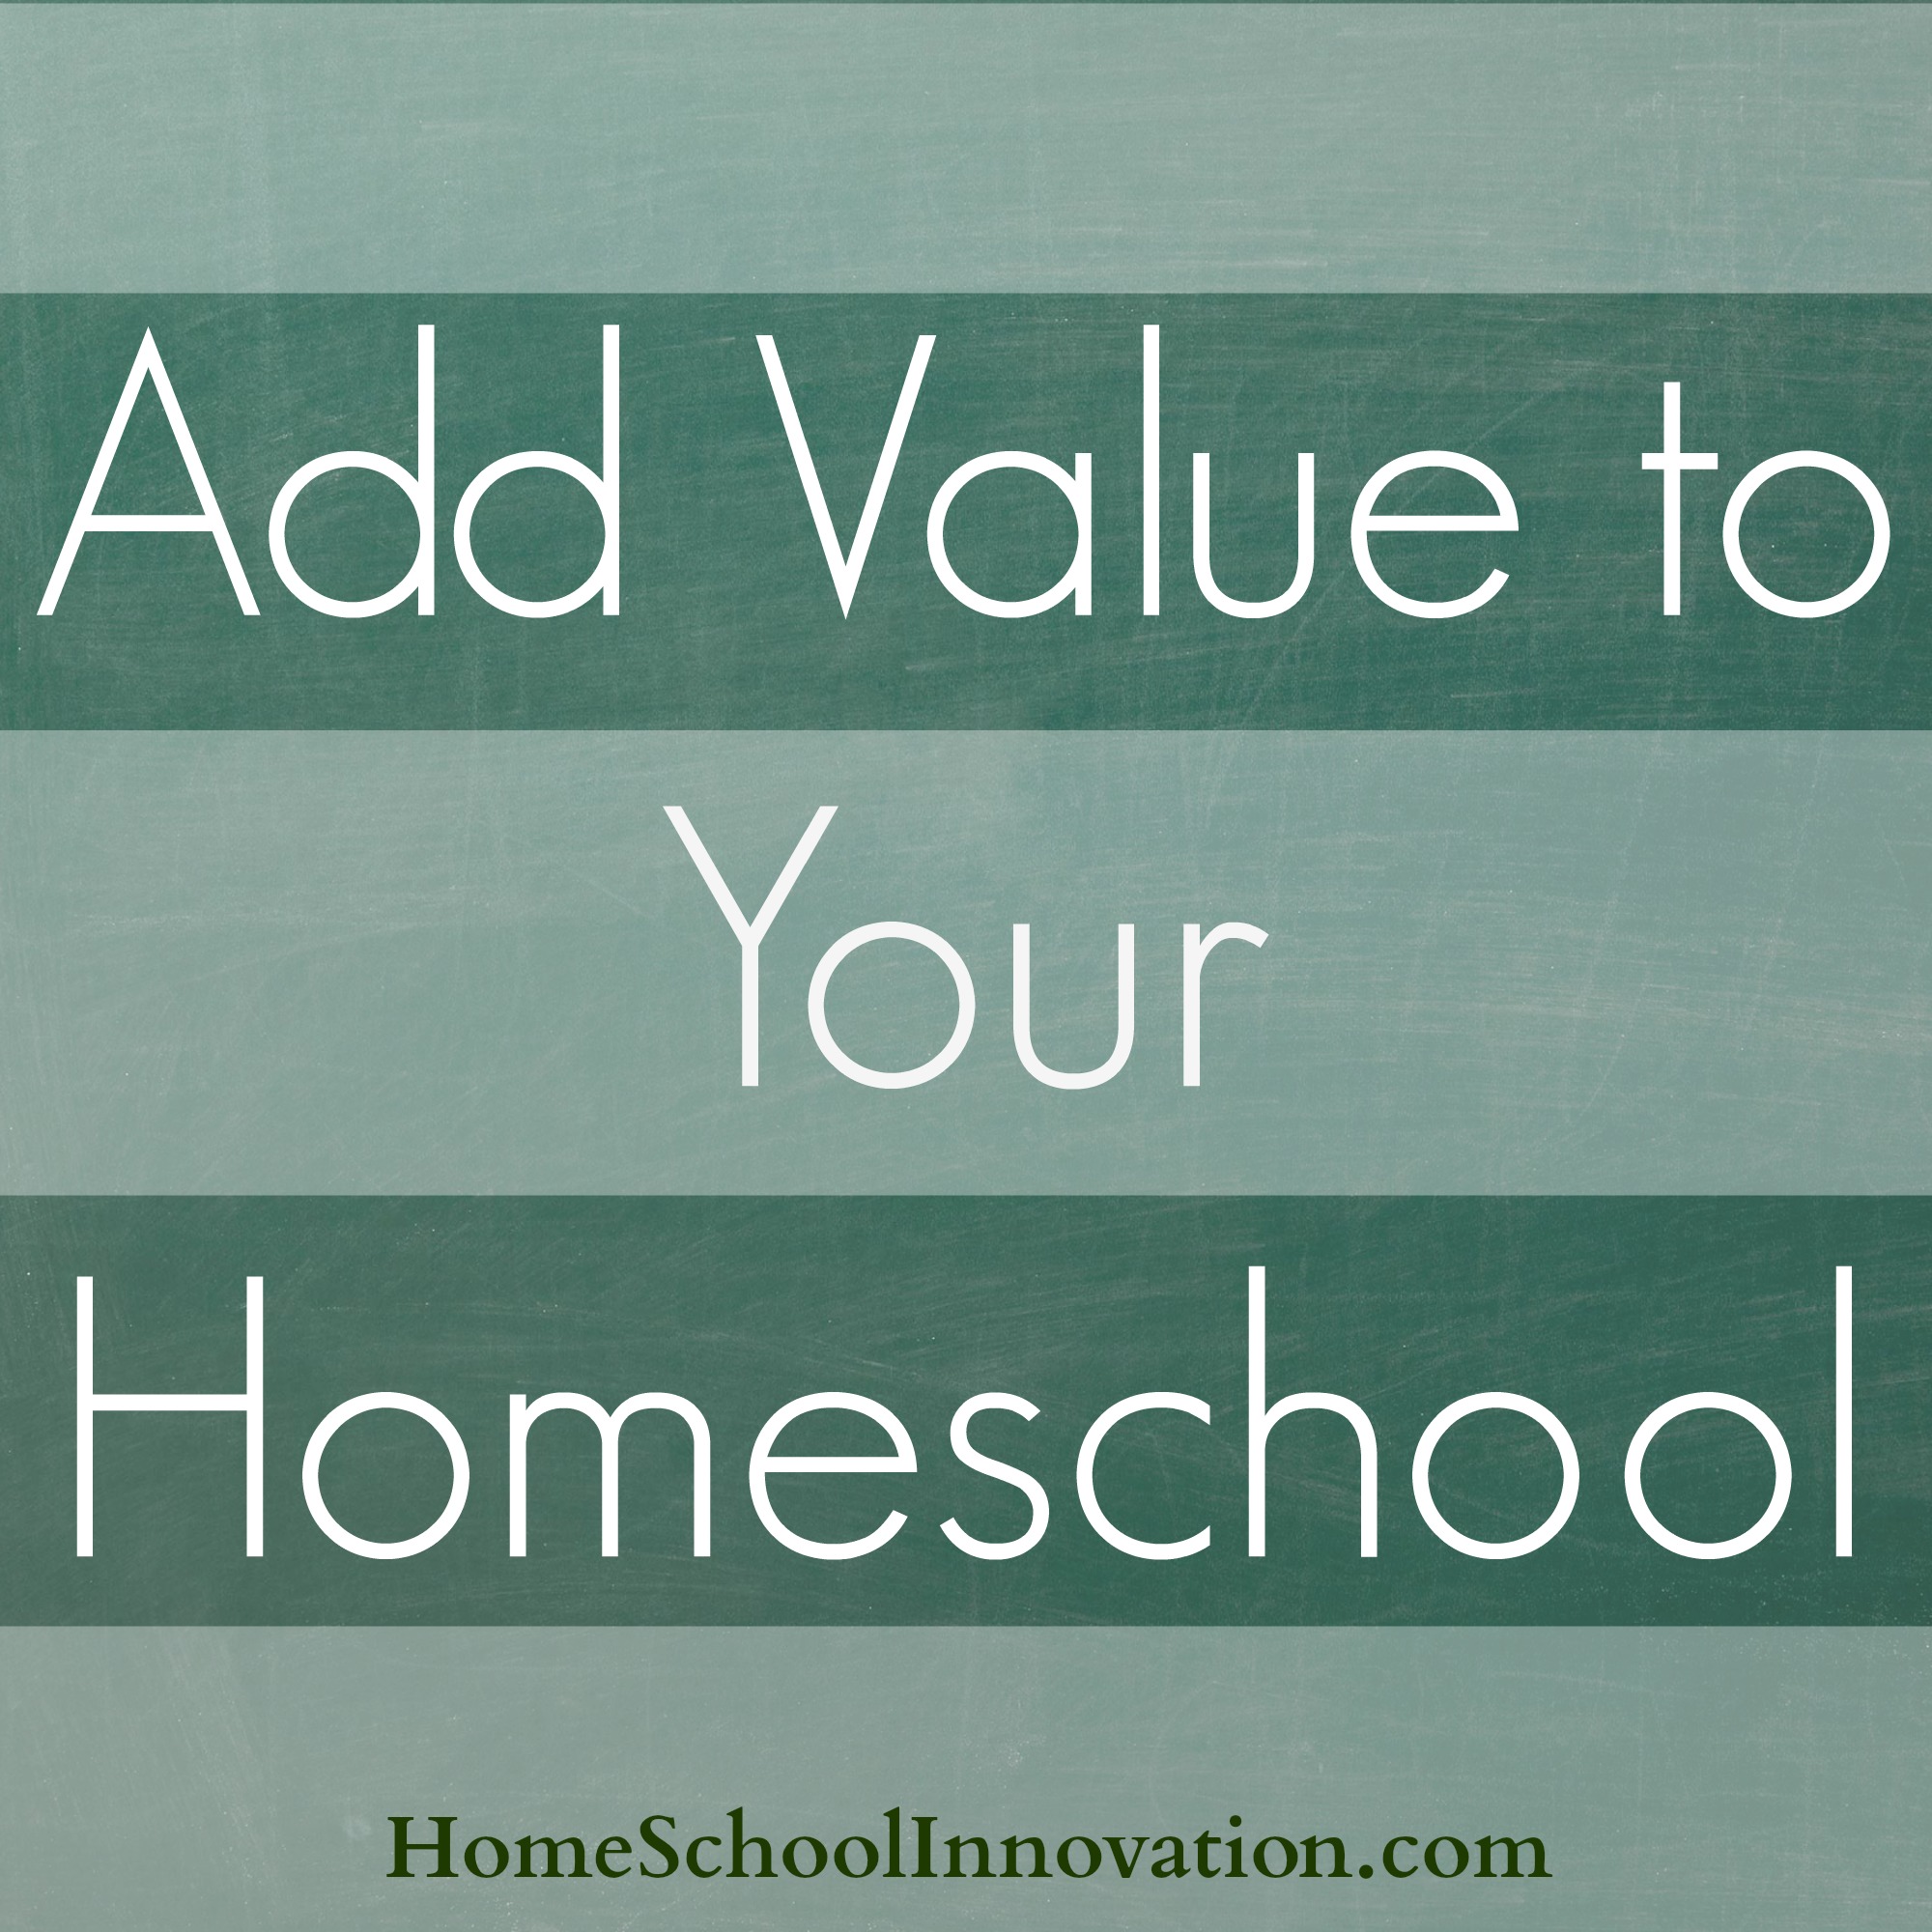 Add Value to Your Homeschool | Home School Innovation